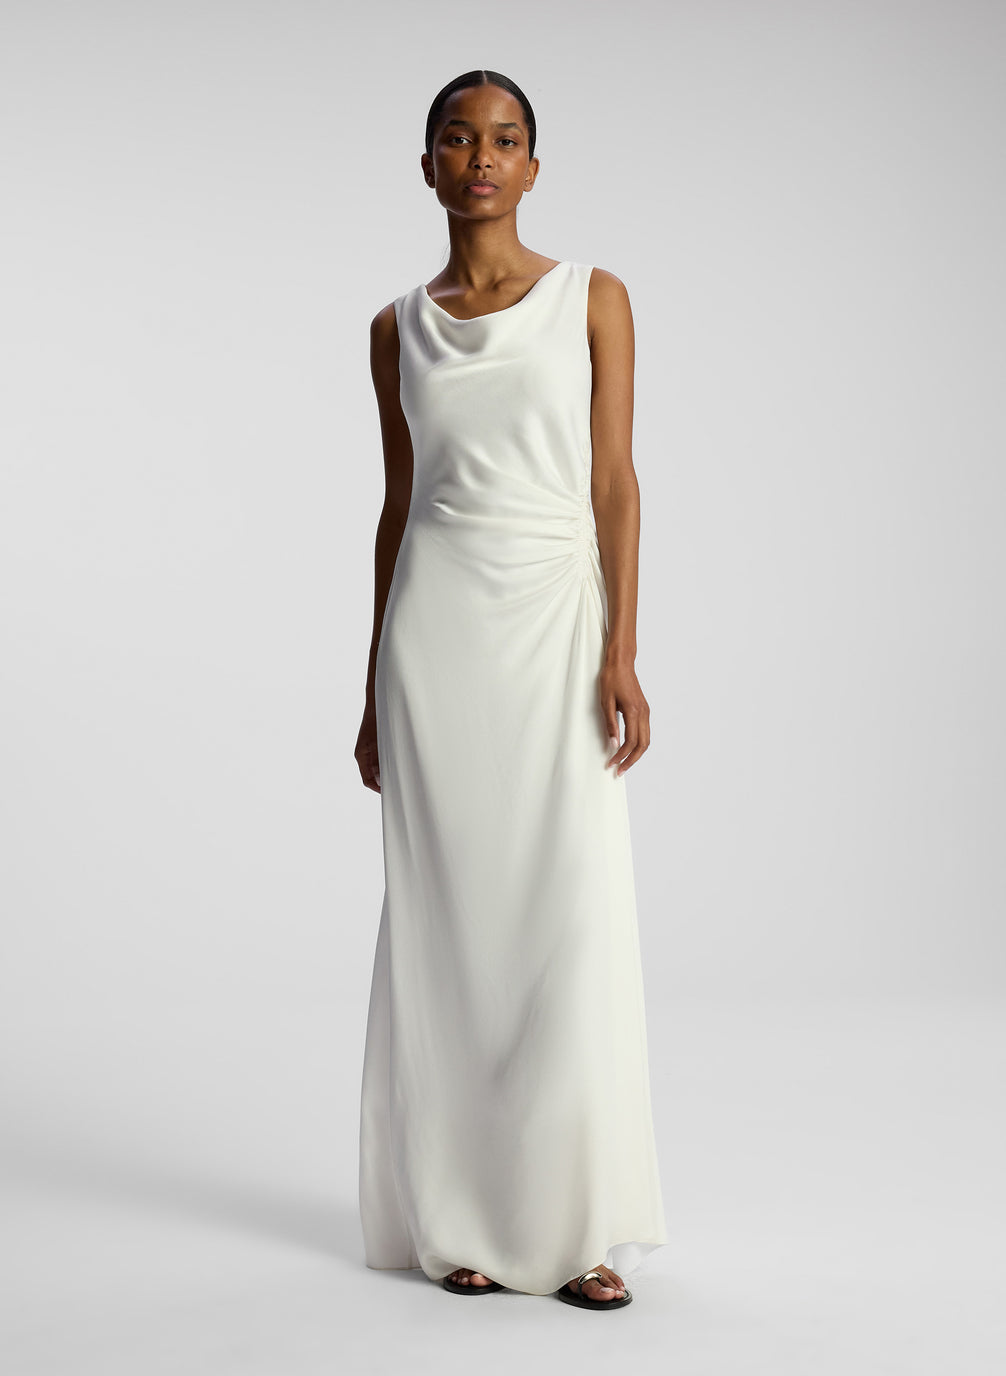 front view of woman wearing white maxi dress